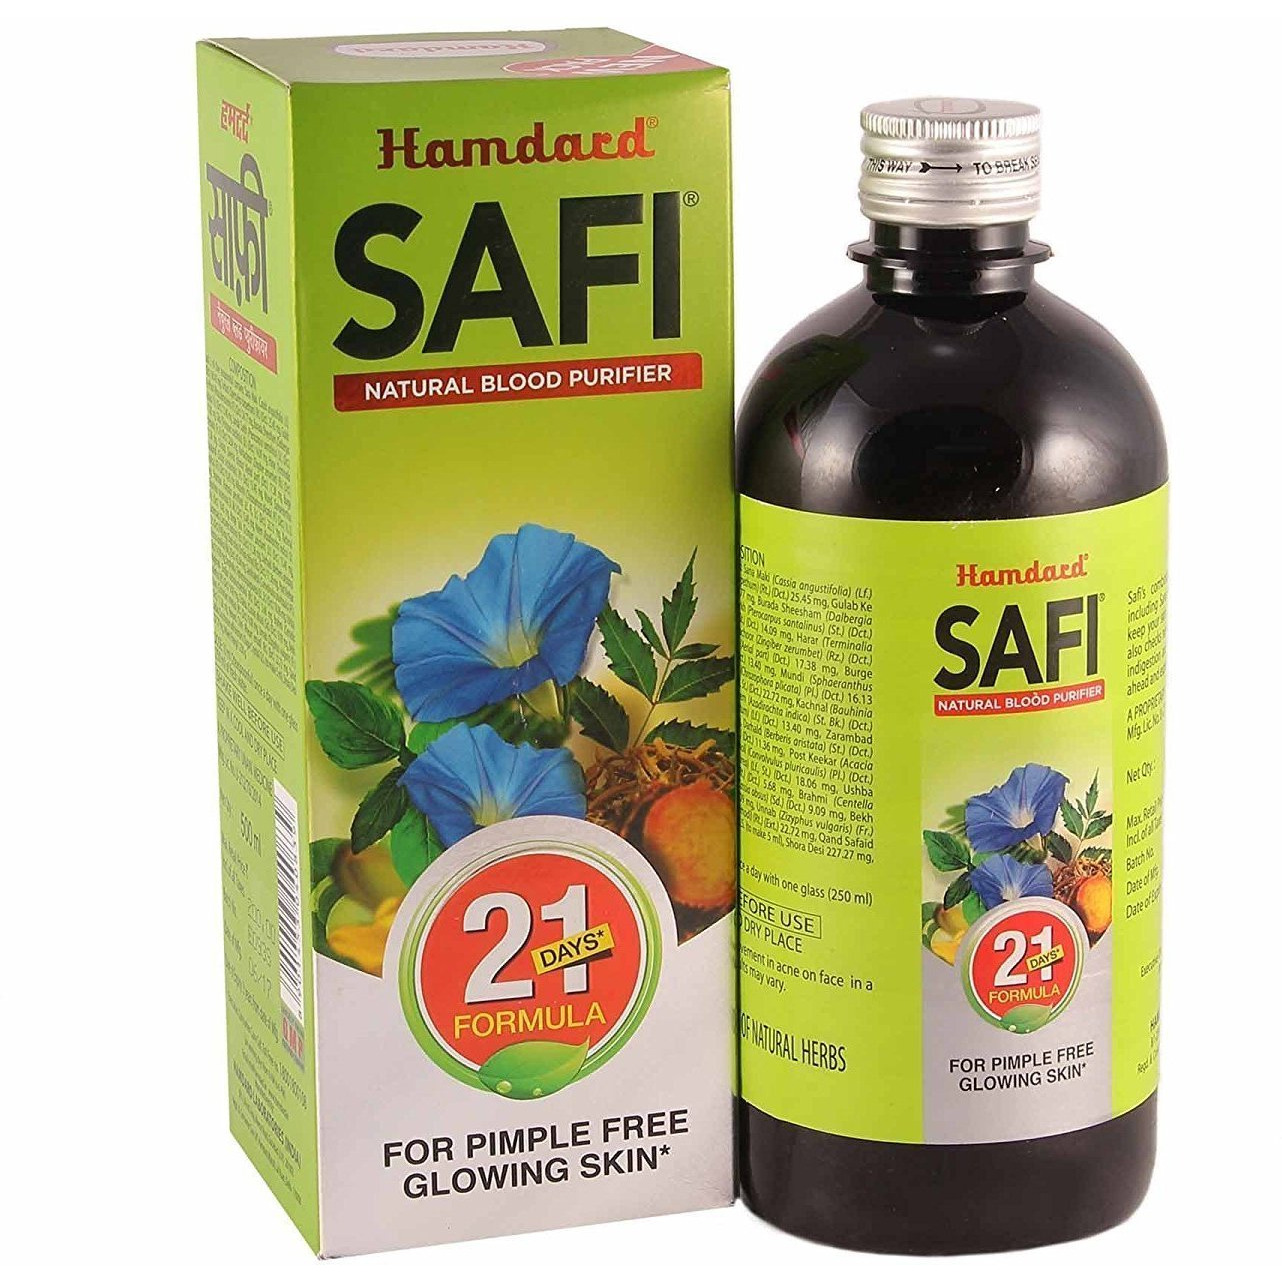 Hamdard Safi Syrup Fda Approved Herbal For Blood Purifier Acne Treatment 500ml